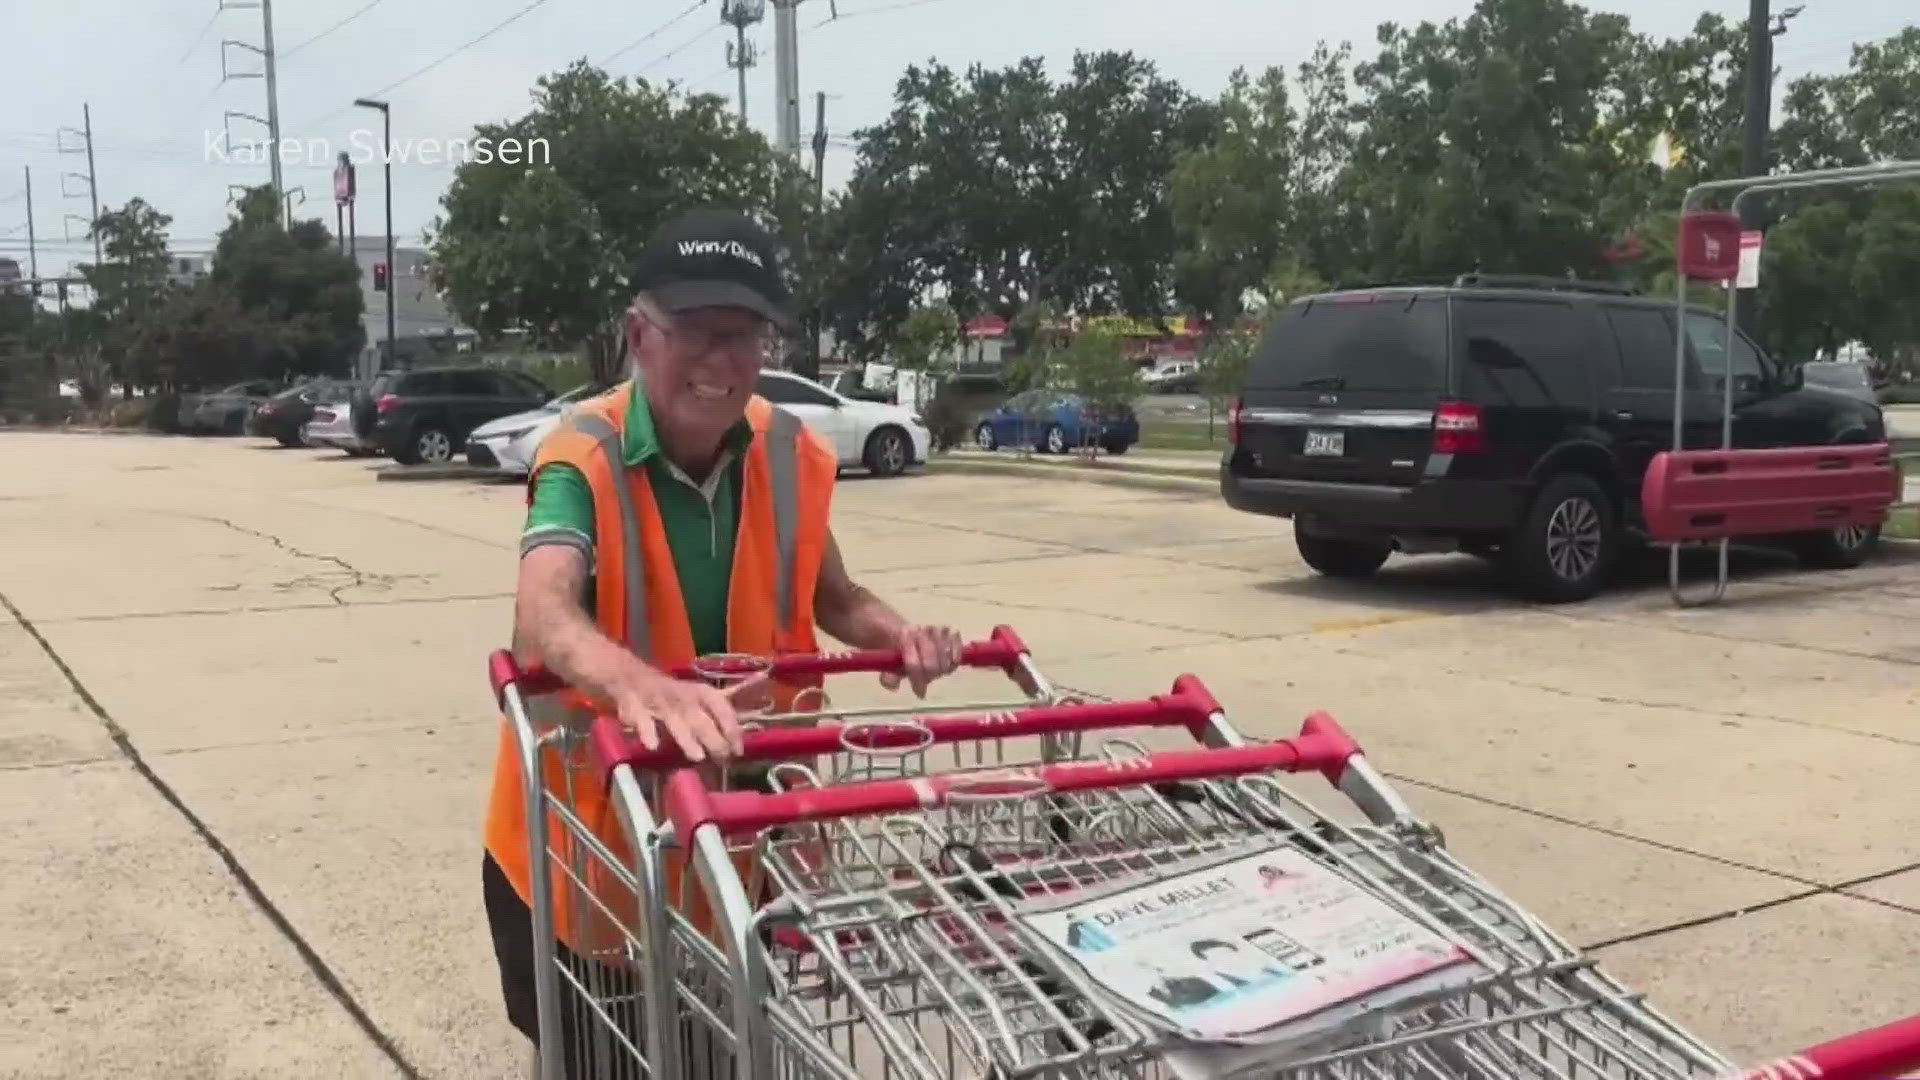 A 90-year-old Air Force veteran is still pushing shopping carts at Winn Dixie in record temperatures. Here's how a former WWL Louisiana anchors is trying to help.